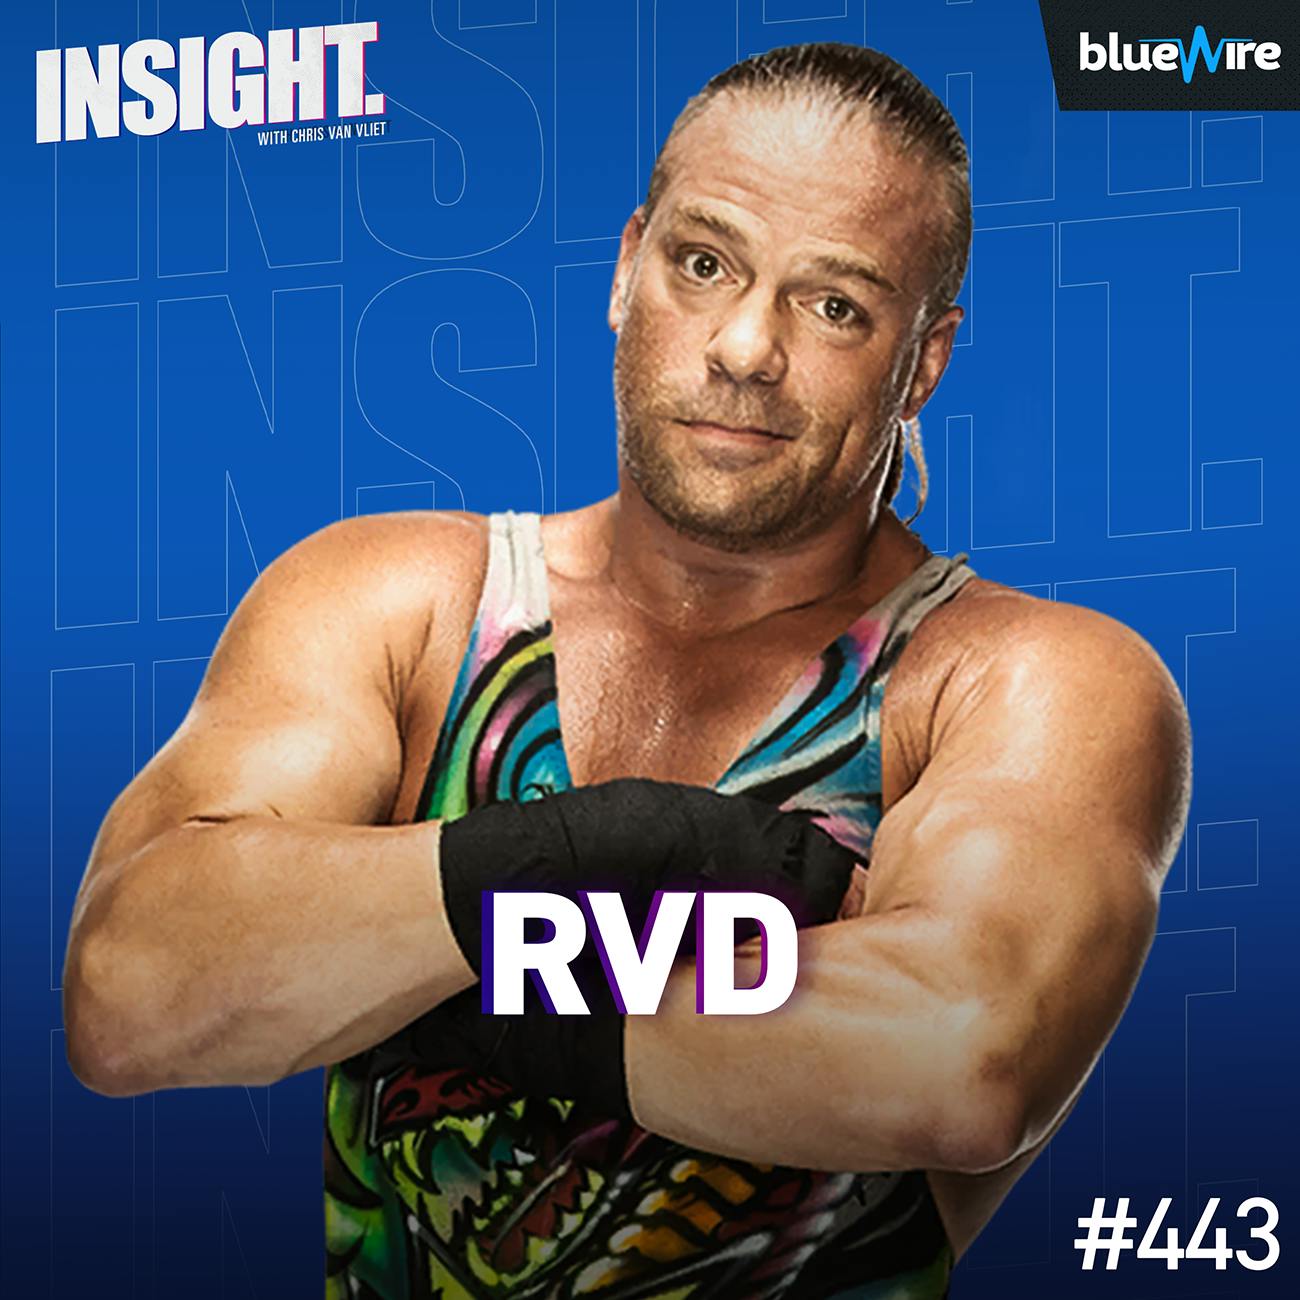 RVD on "If Cena Wins We Riot", Paul Heyman, His ECW Mount Rushmore - Interview From November 2021